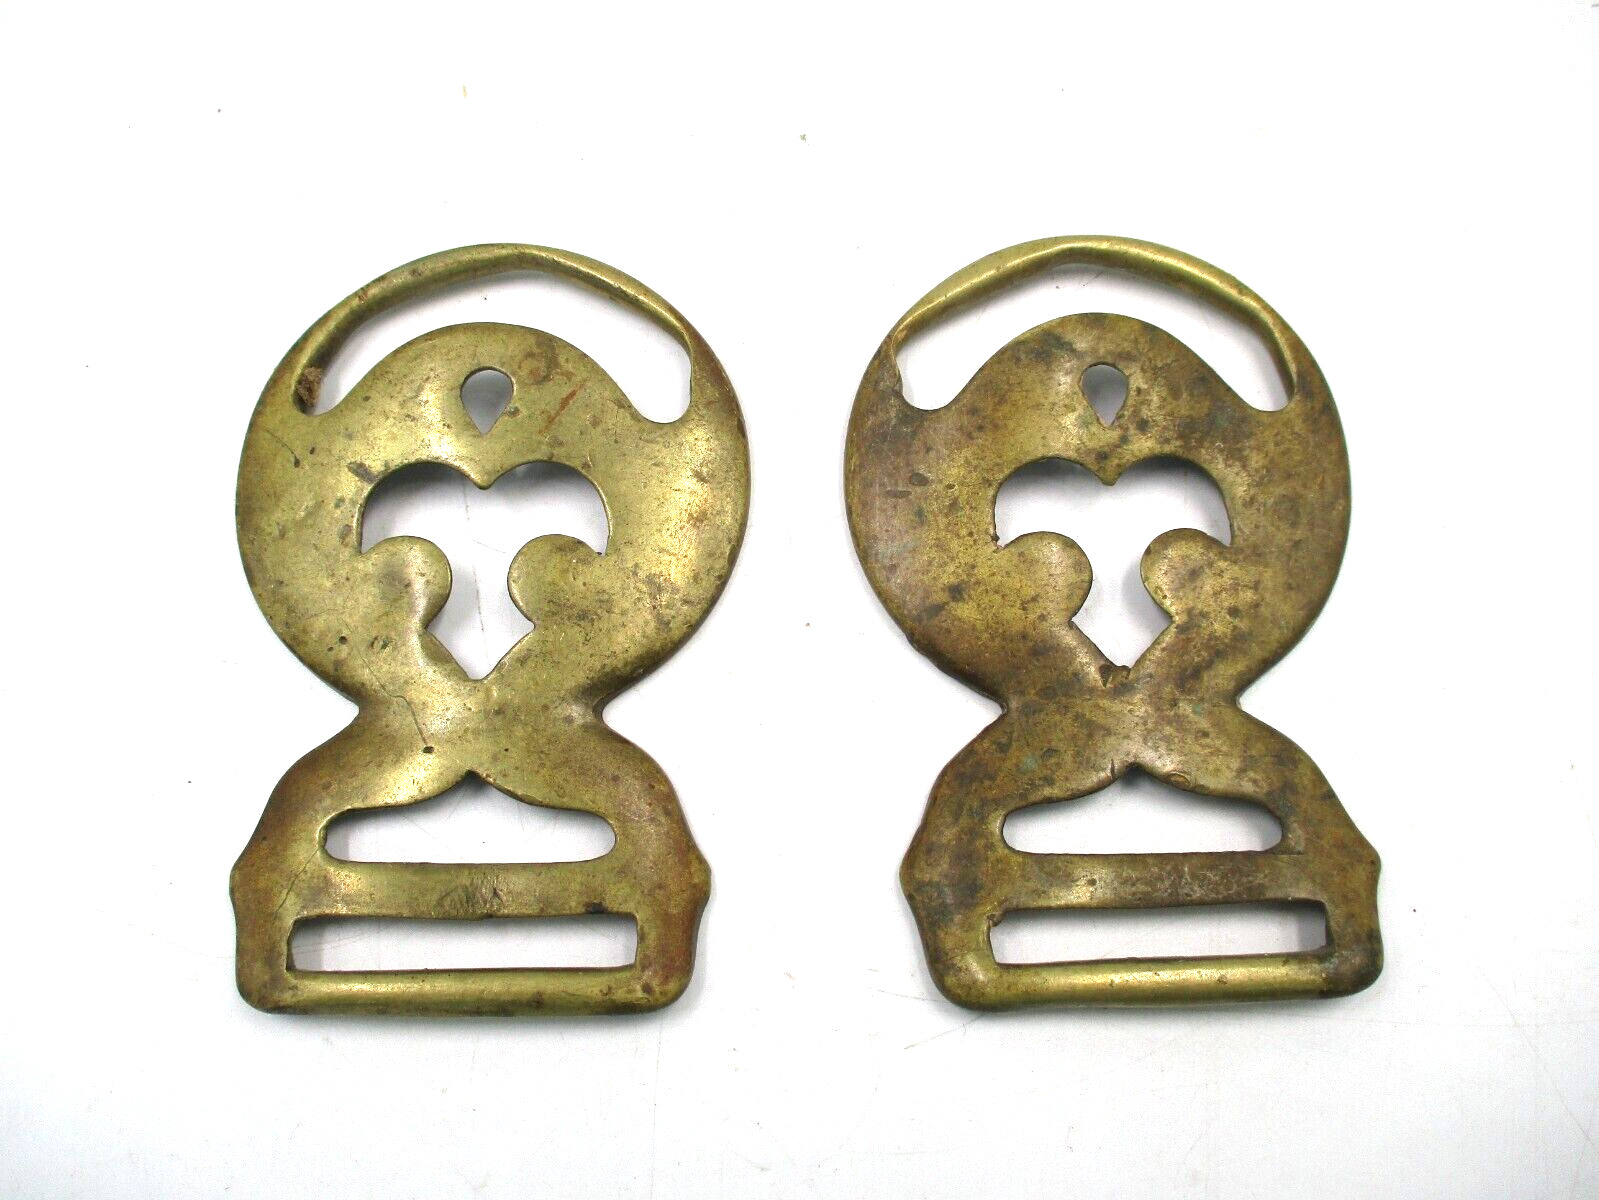 Vintage Brass Horse Harness Medallions.Matching pair.